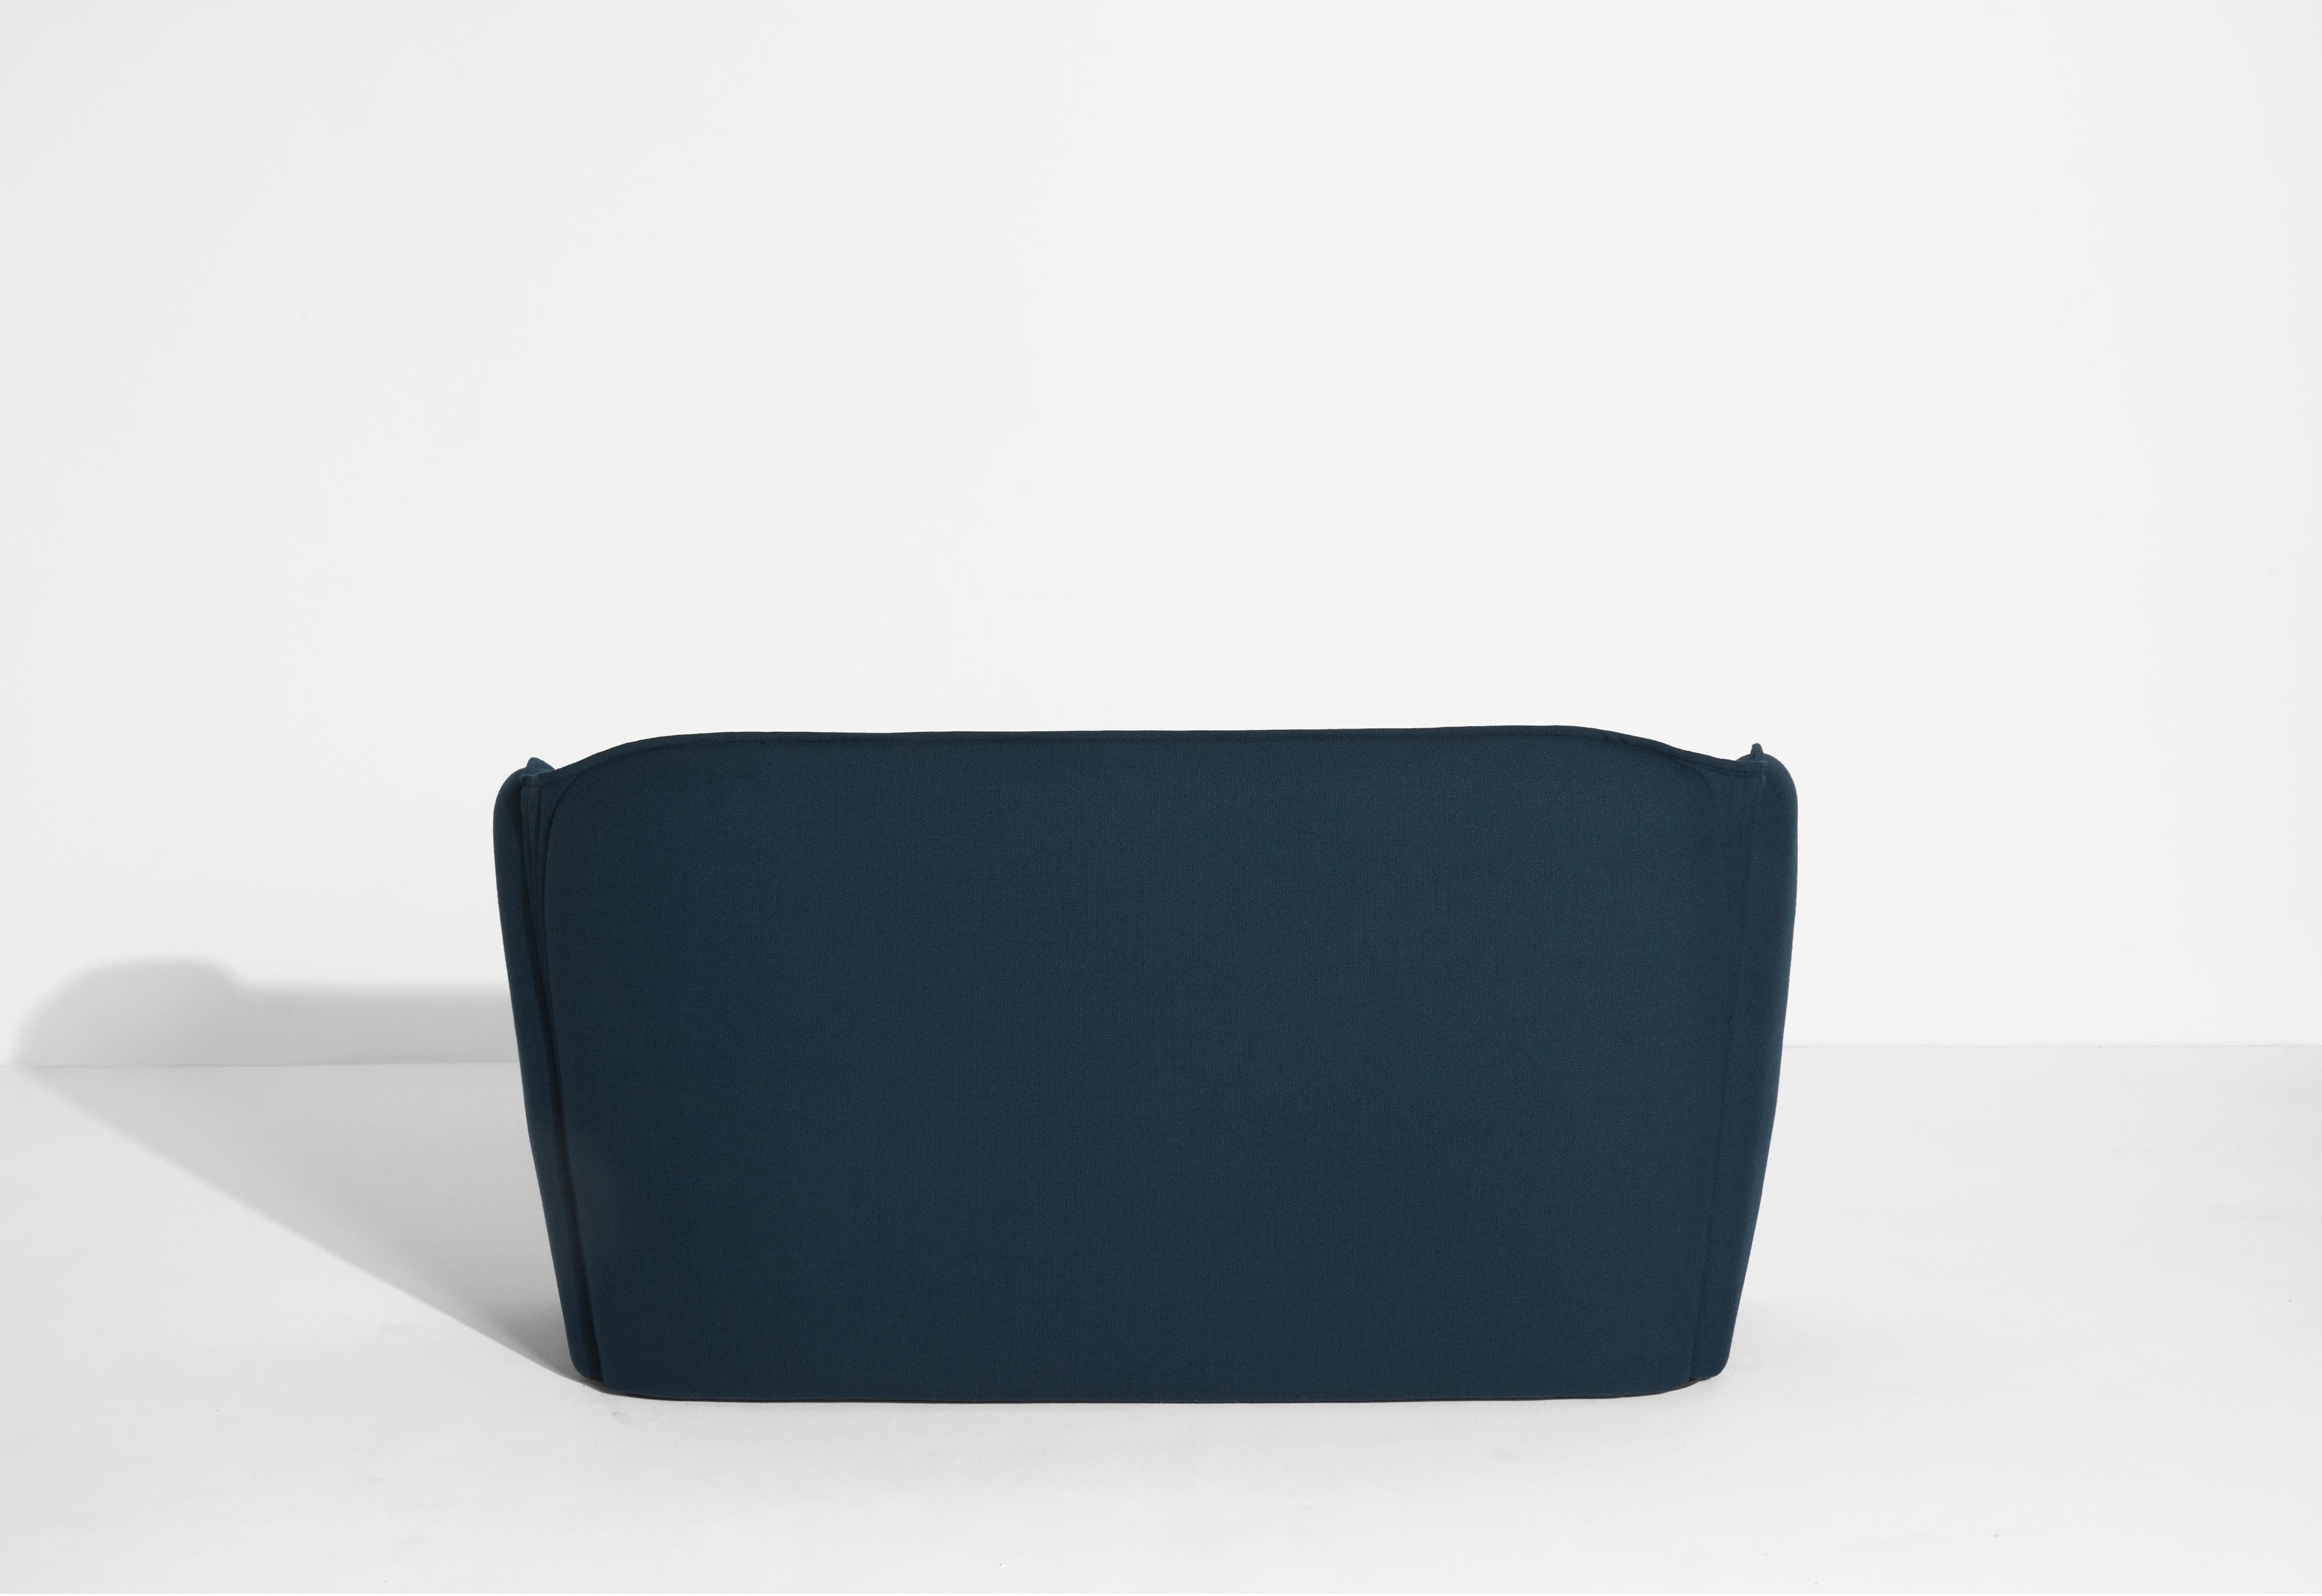 Petite Friture Lily Sofa in Navy Blue by Färg & Blanche, 2022 For Sale 4